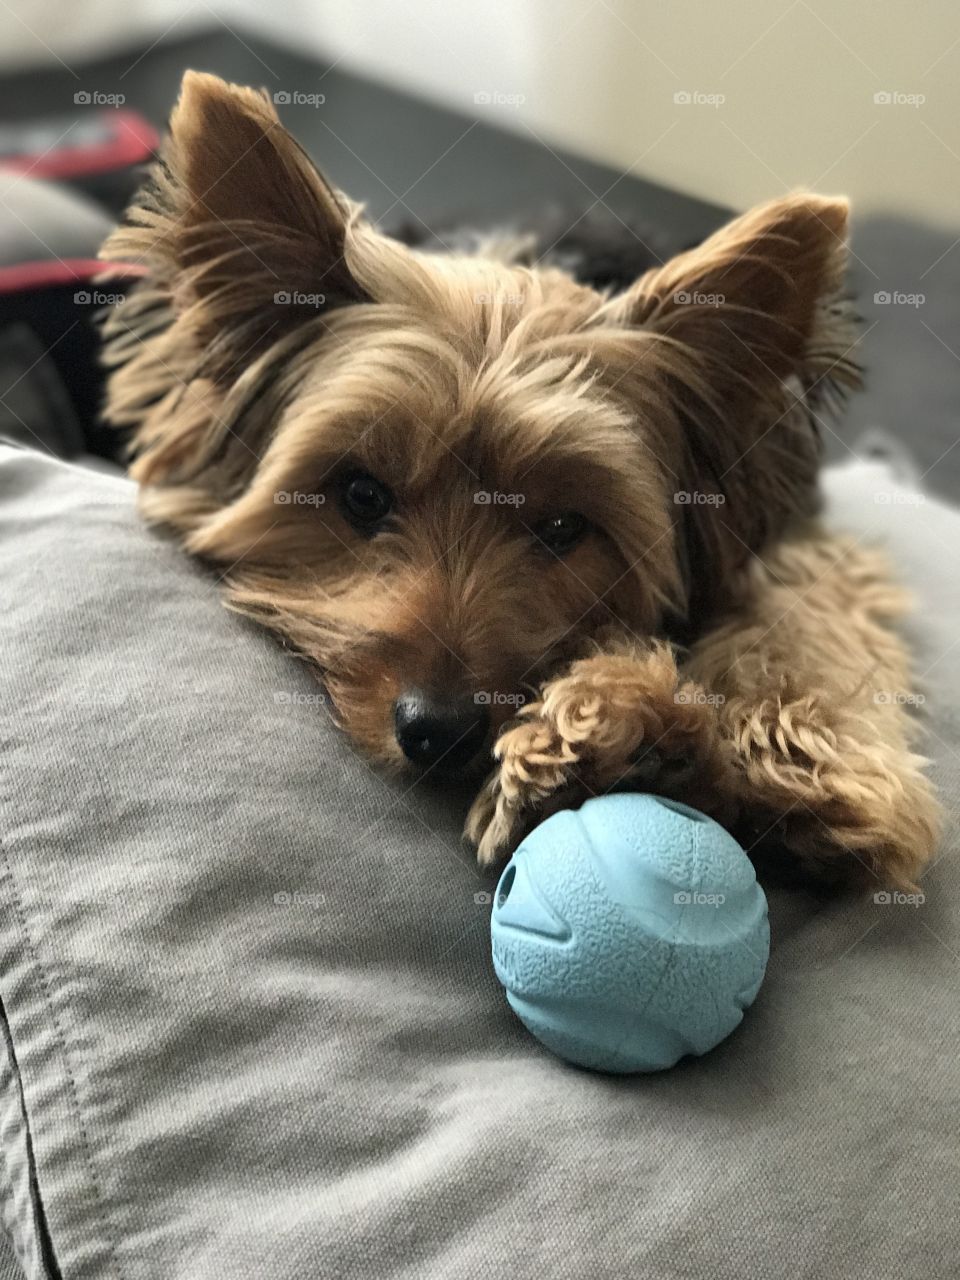 Yorkie! Ball lover! Time to play! 